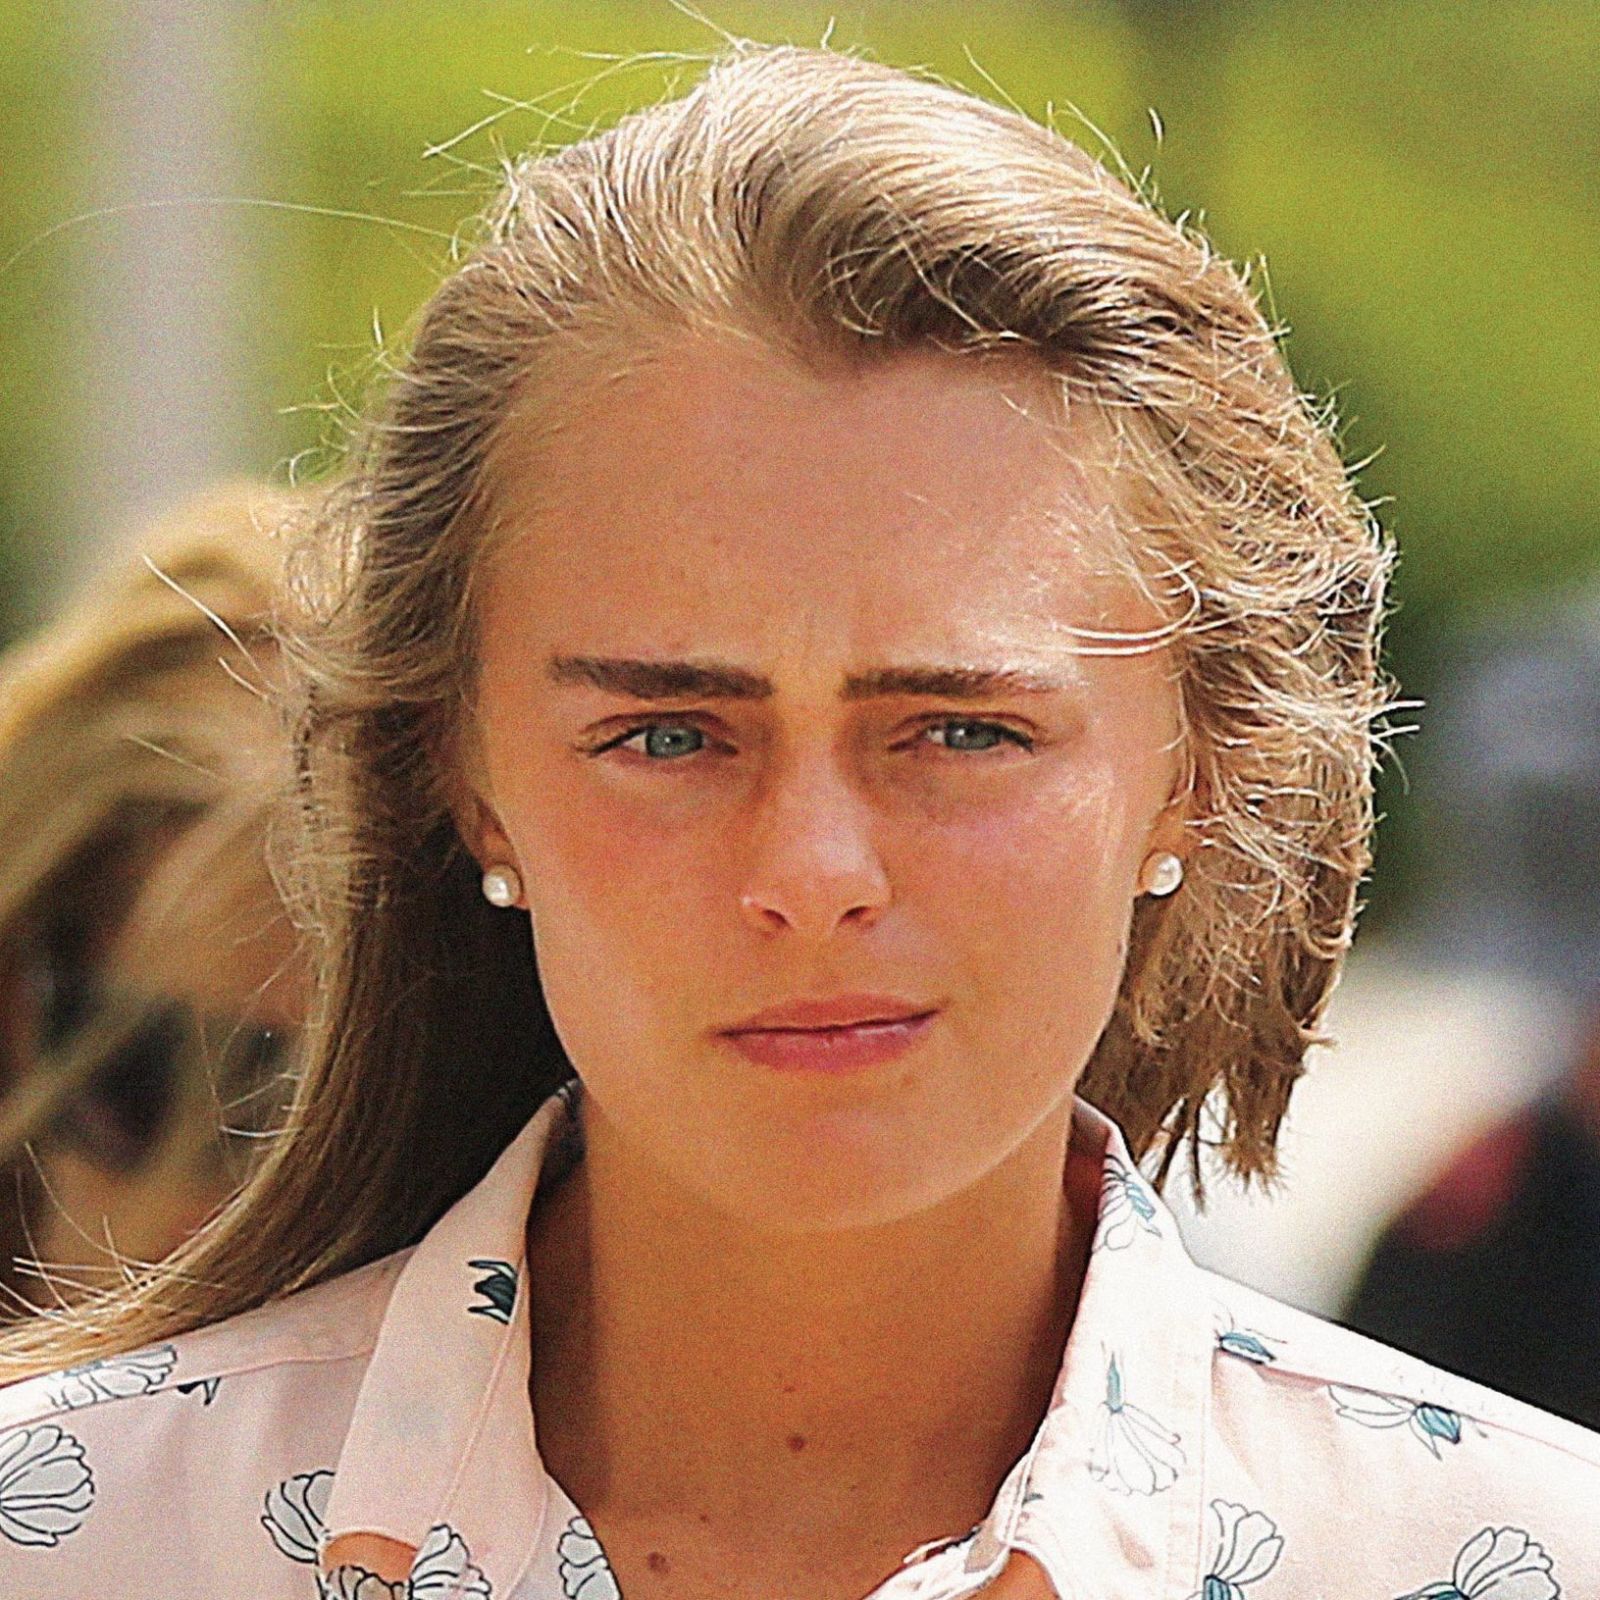 Did Words Kill? Behind the Scenes of the Shocking Michelle Carter Verdict